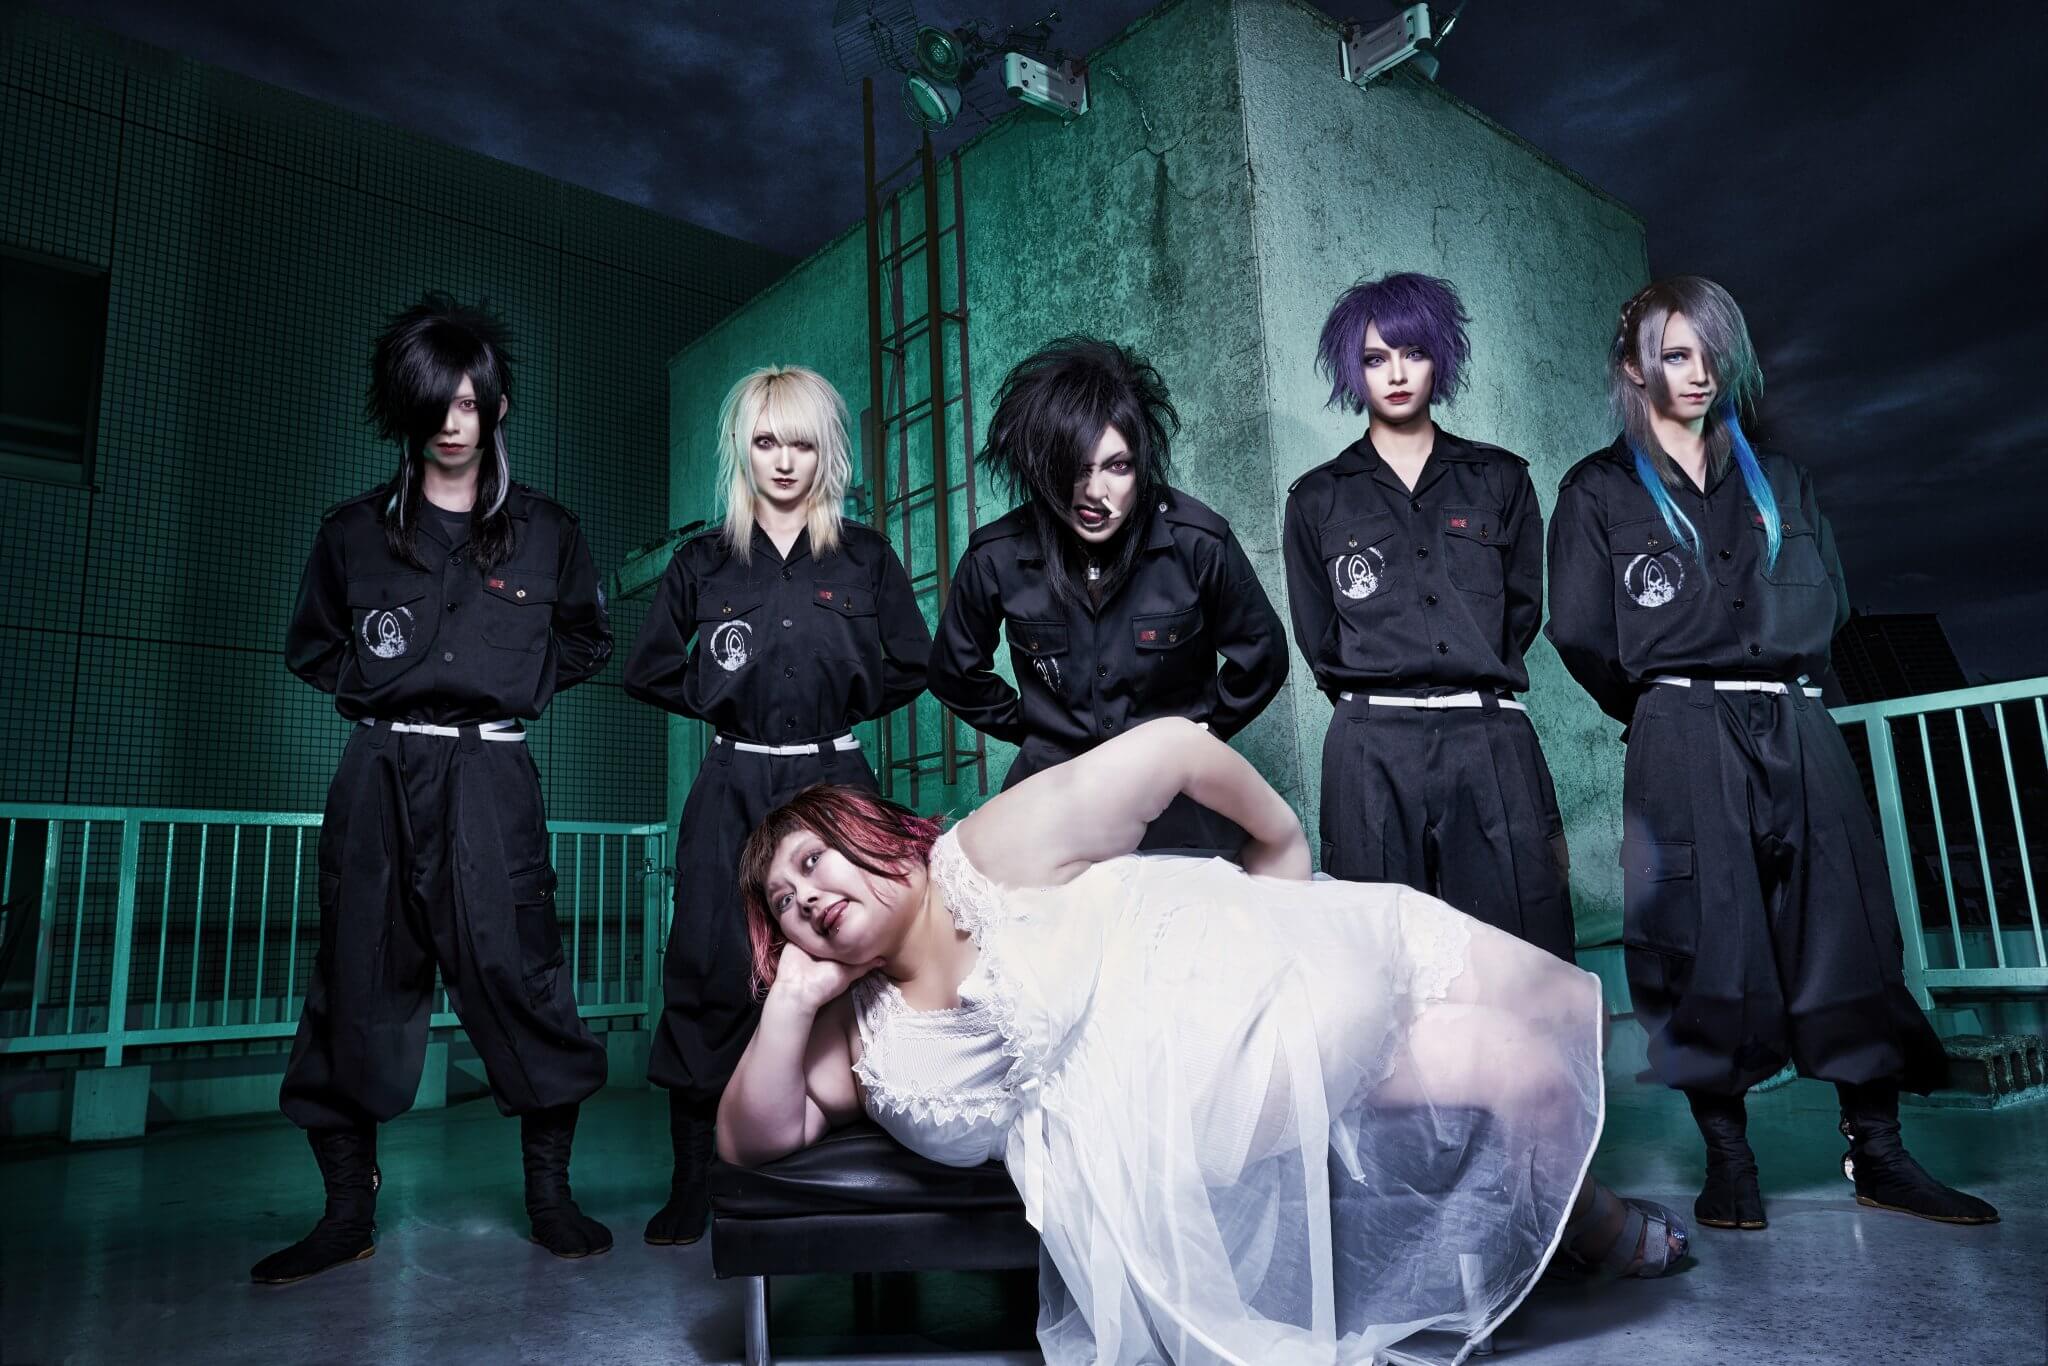 Chain×maiL has disbanded to form new band: YARENAI